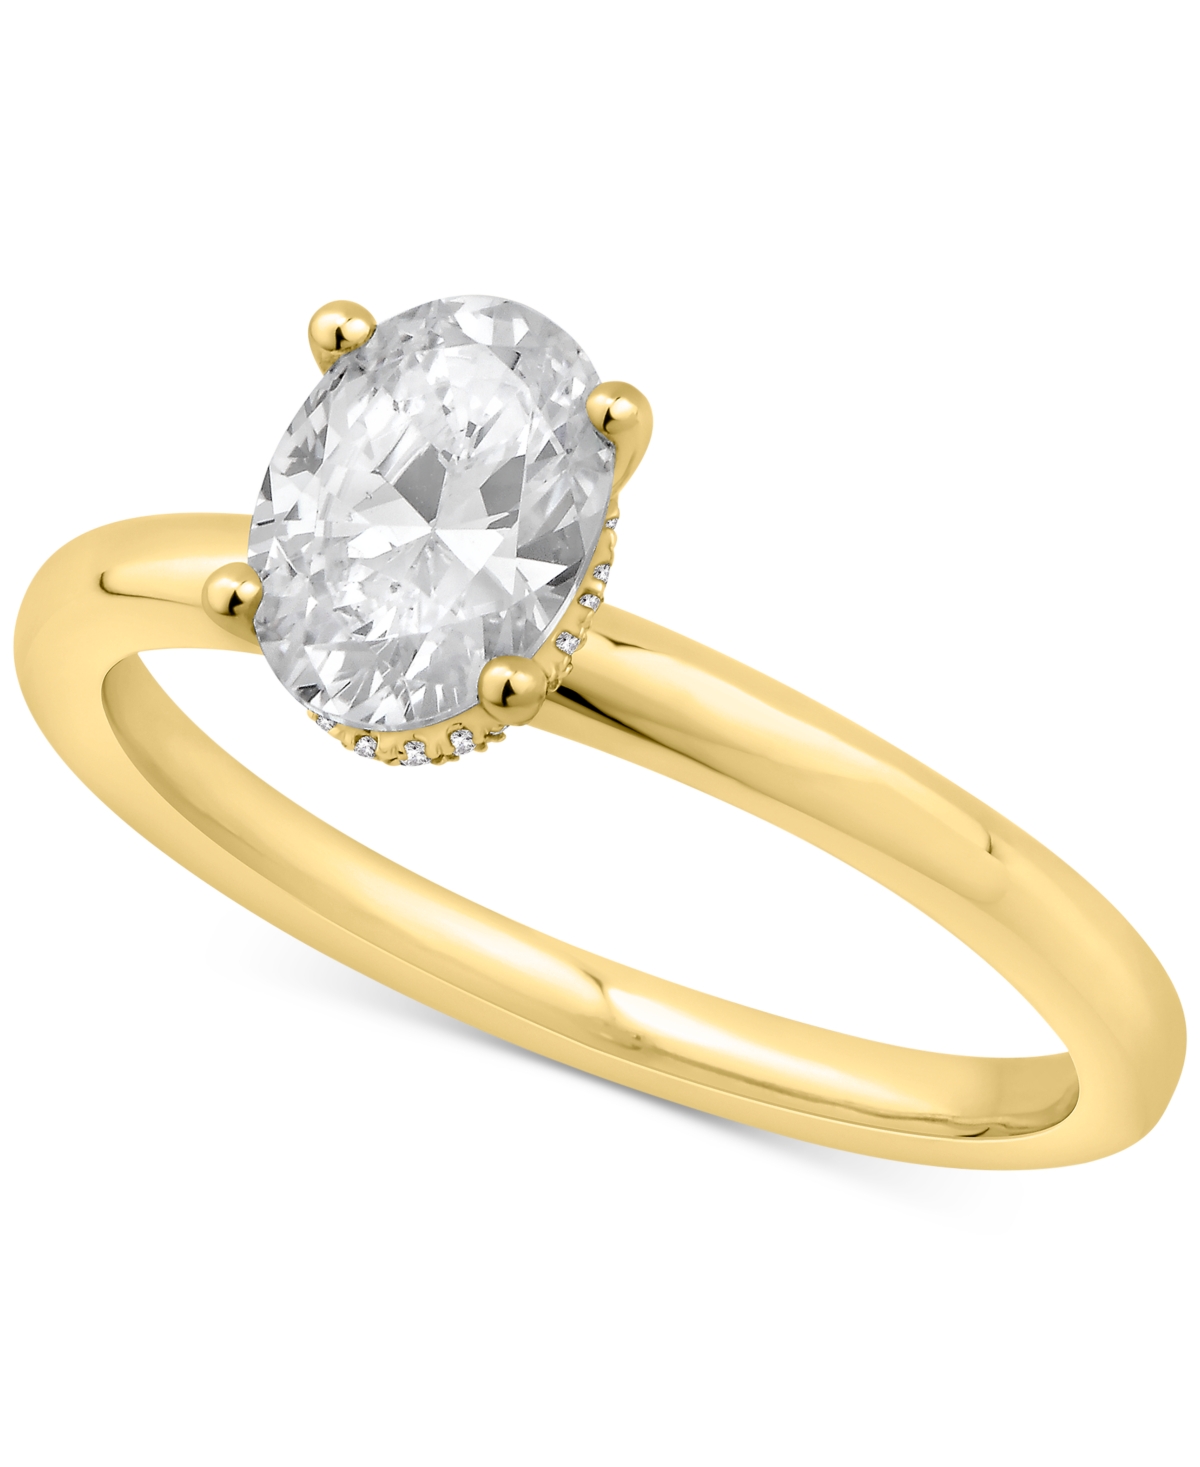 Gia Certified Diamonds Gia Certified Diamond Oval Engagement Ring (1 ct. t.w.) in 14k Gold